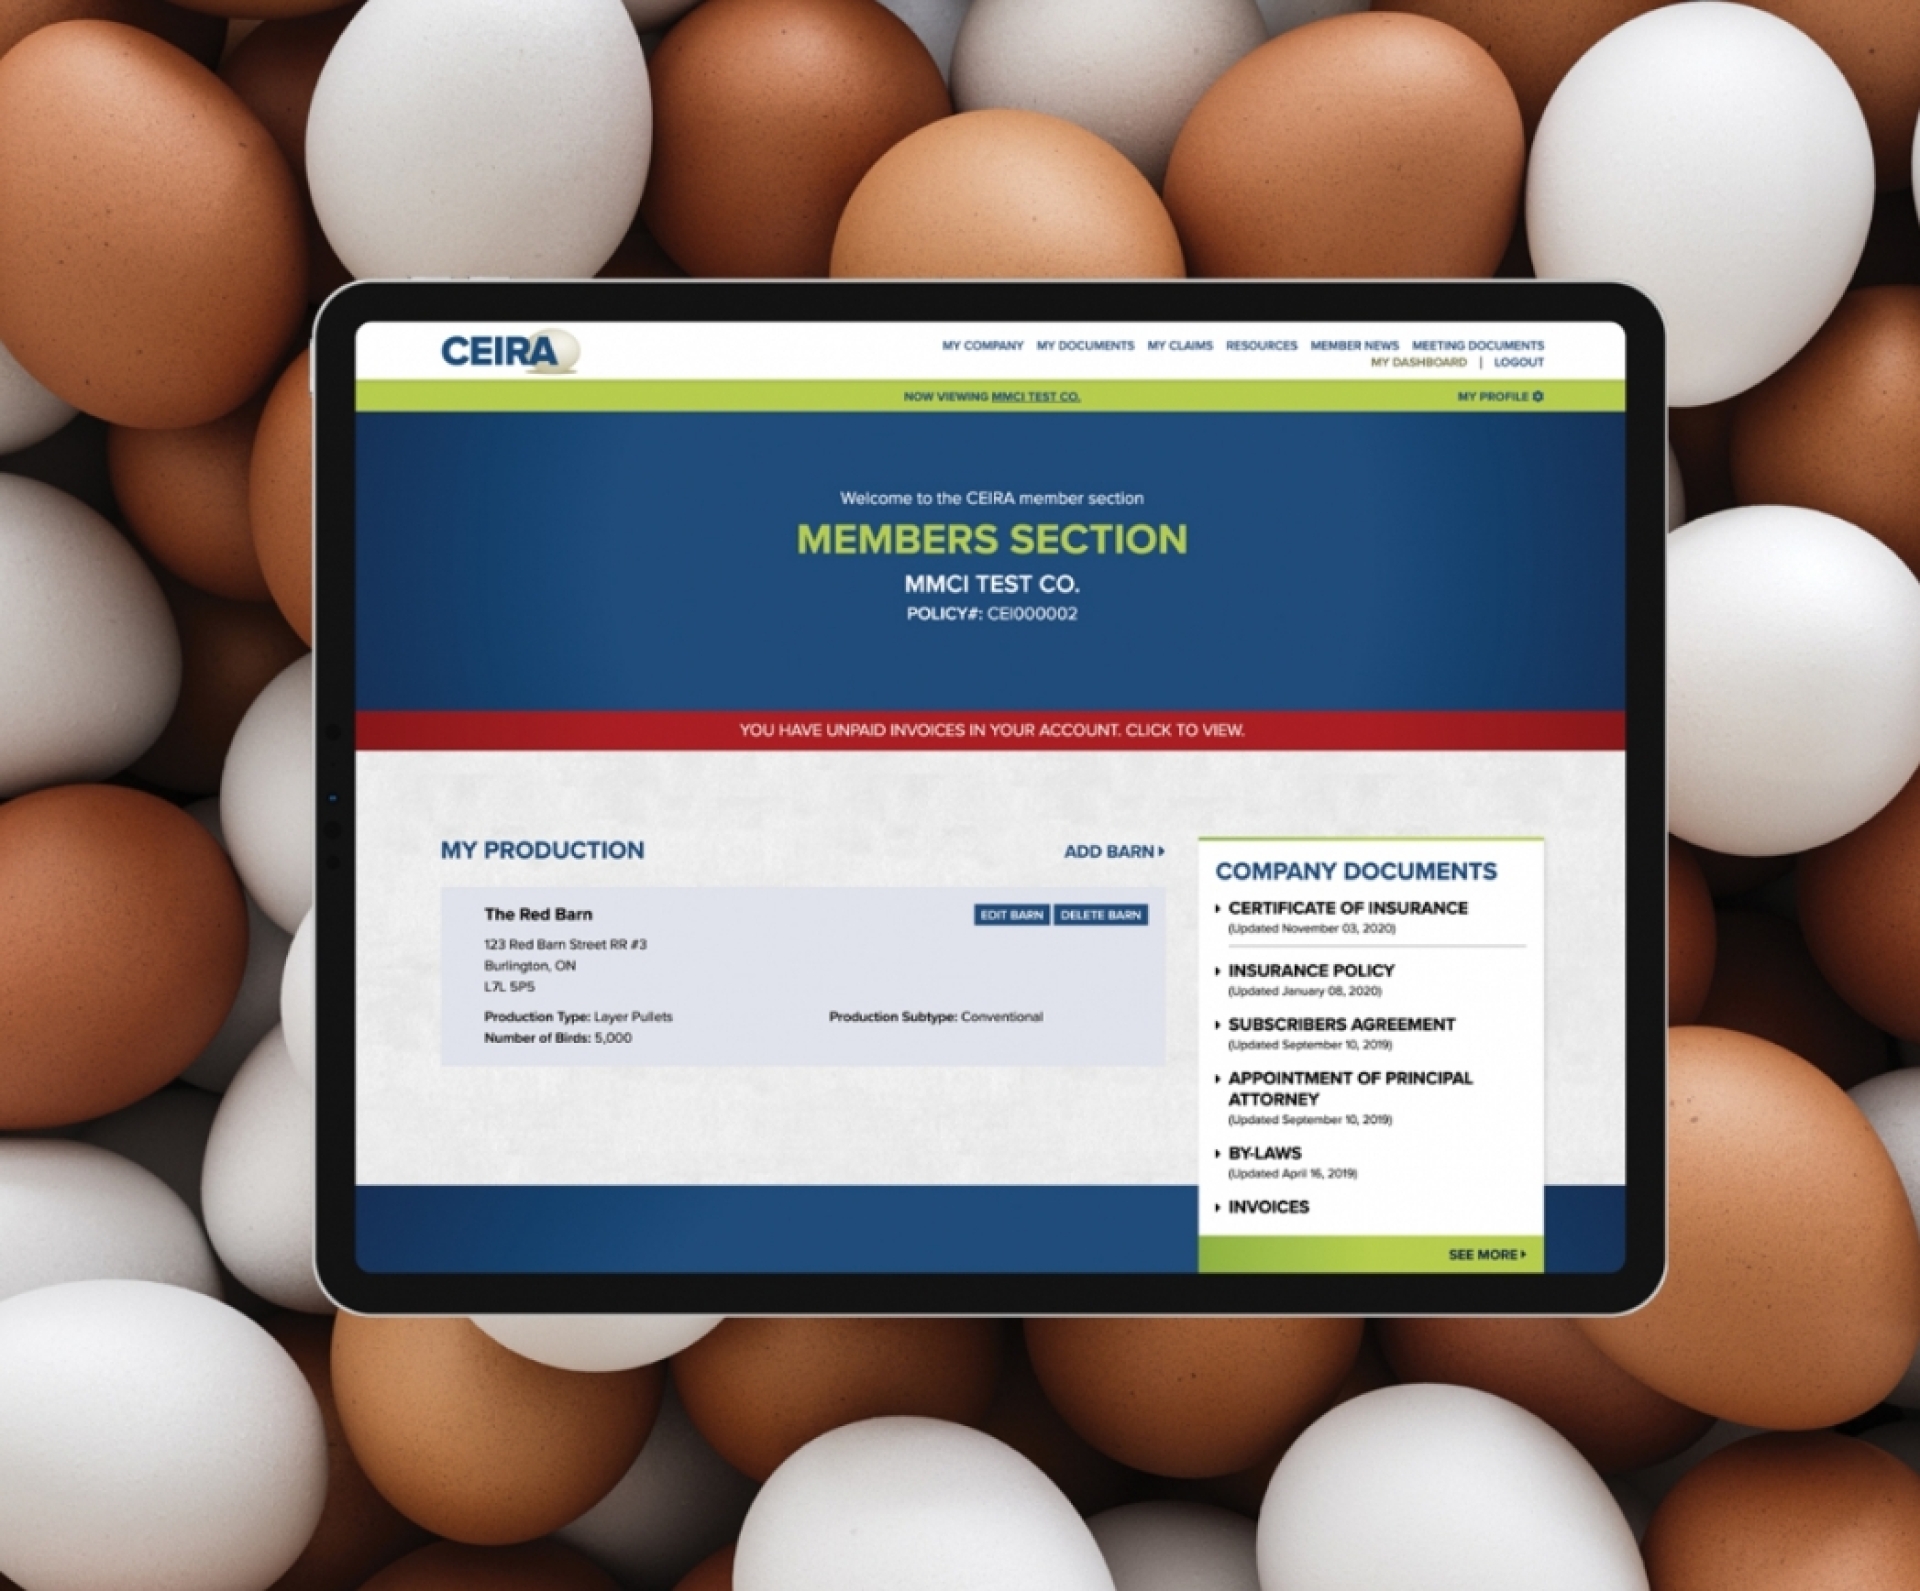 Ceira website design shown on a tablet screen with eggs in the background